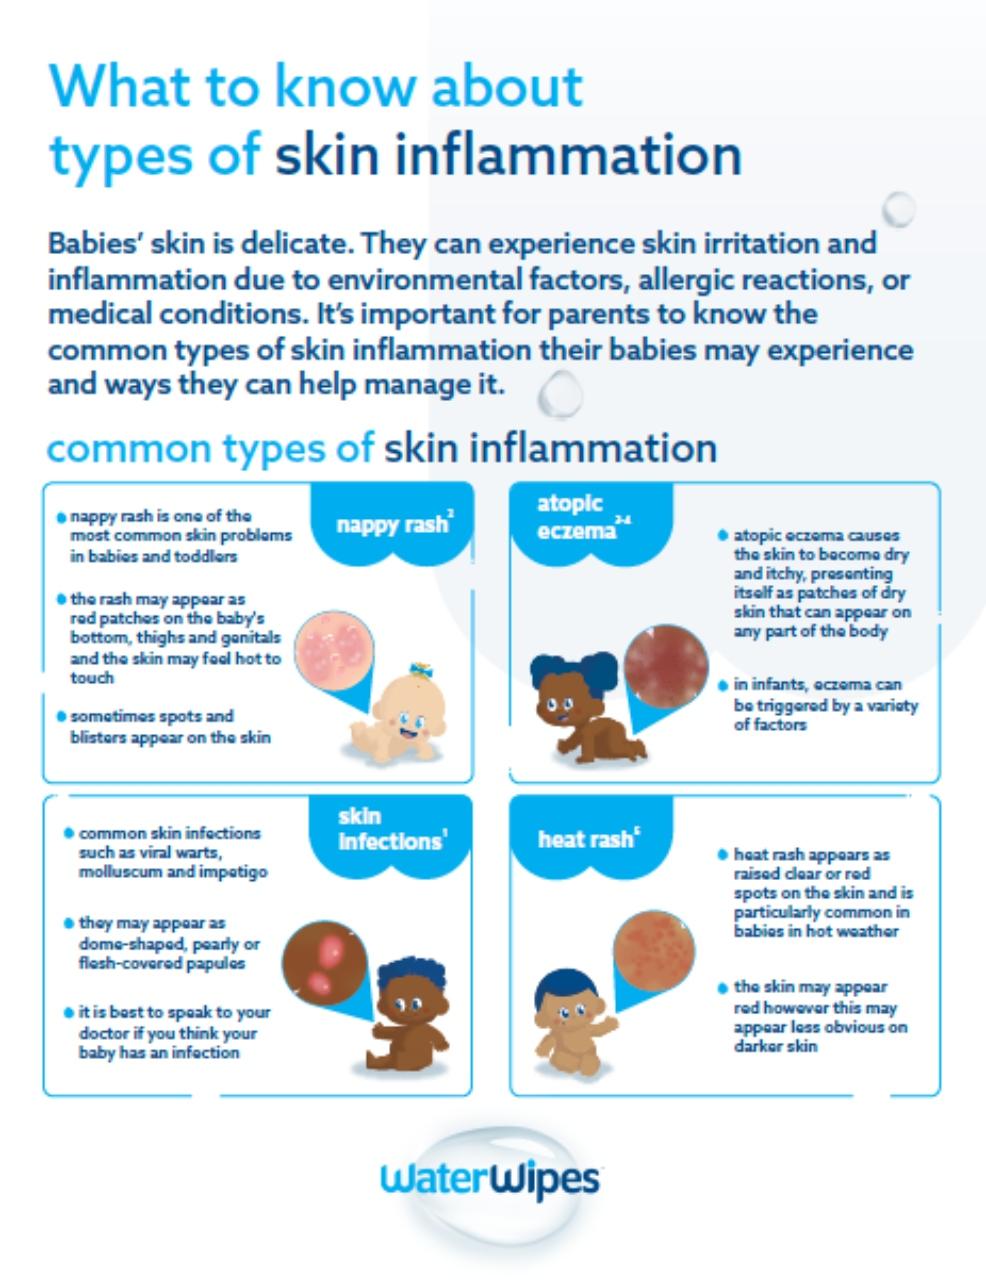 picture of what to know about types of skin inflammation